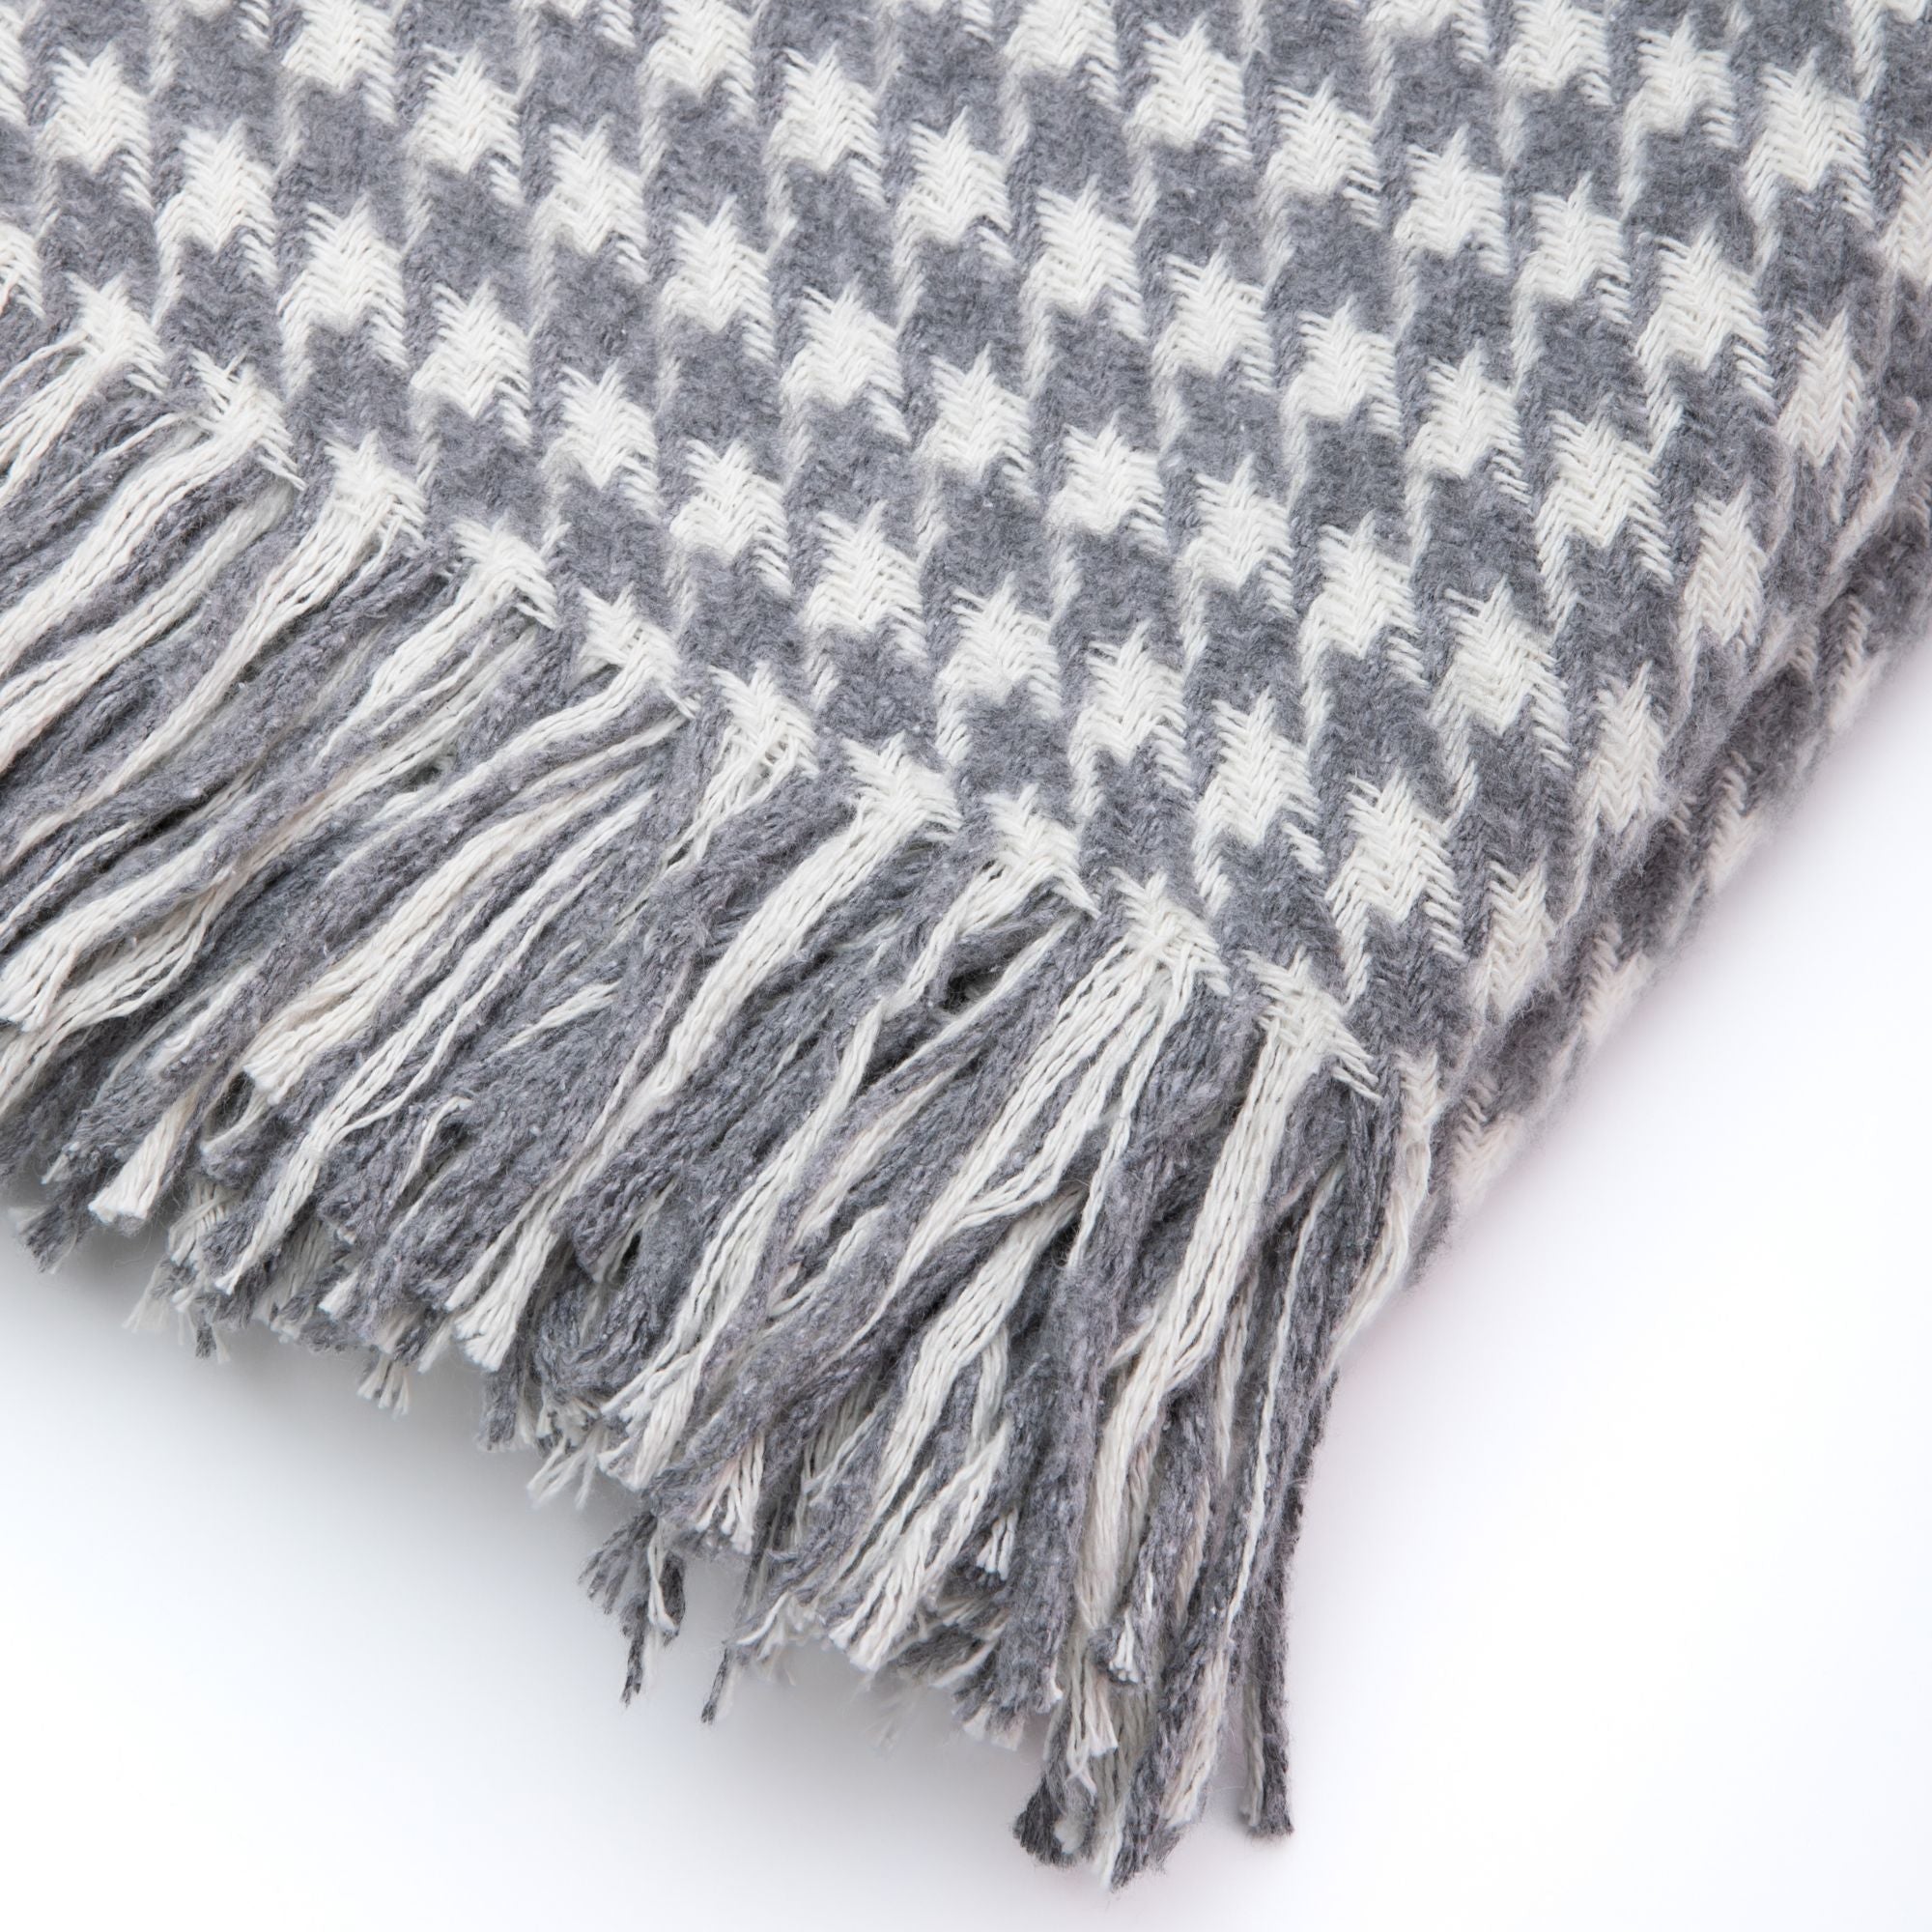 Trimita | Close-up view of the Grey Houndstooth Luxury Throw Blanket on a white background, highlighting the intricate weaving details and texture.